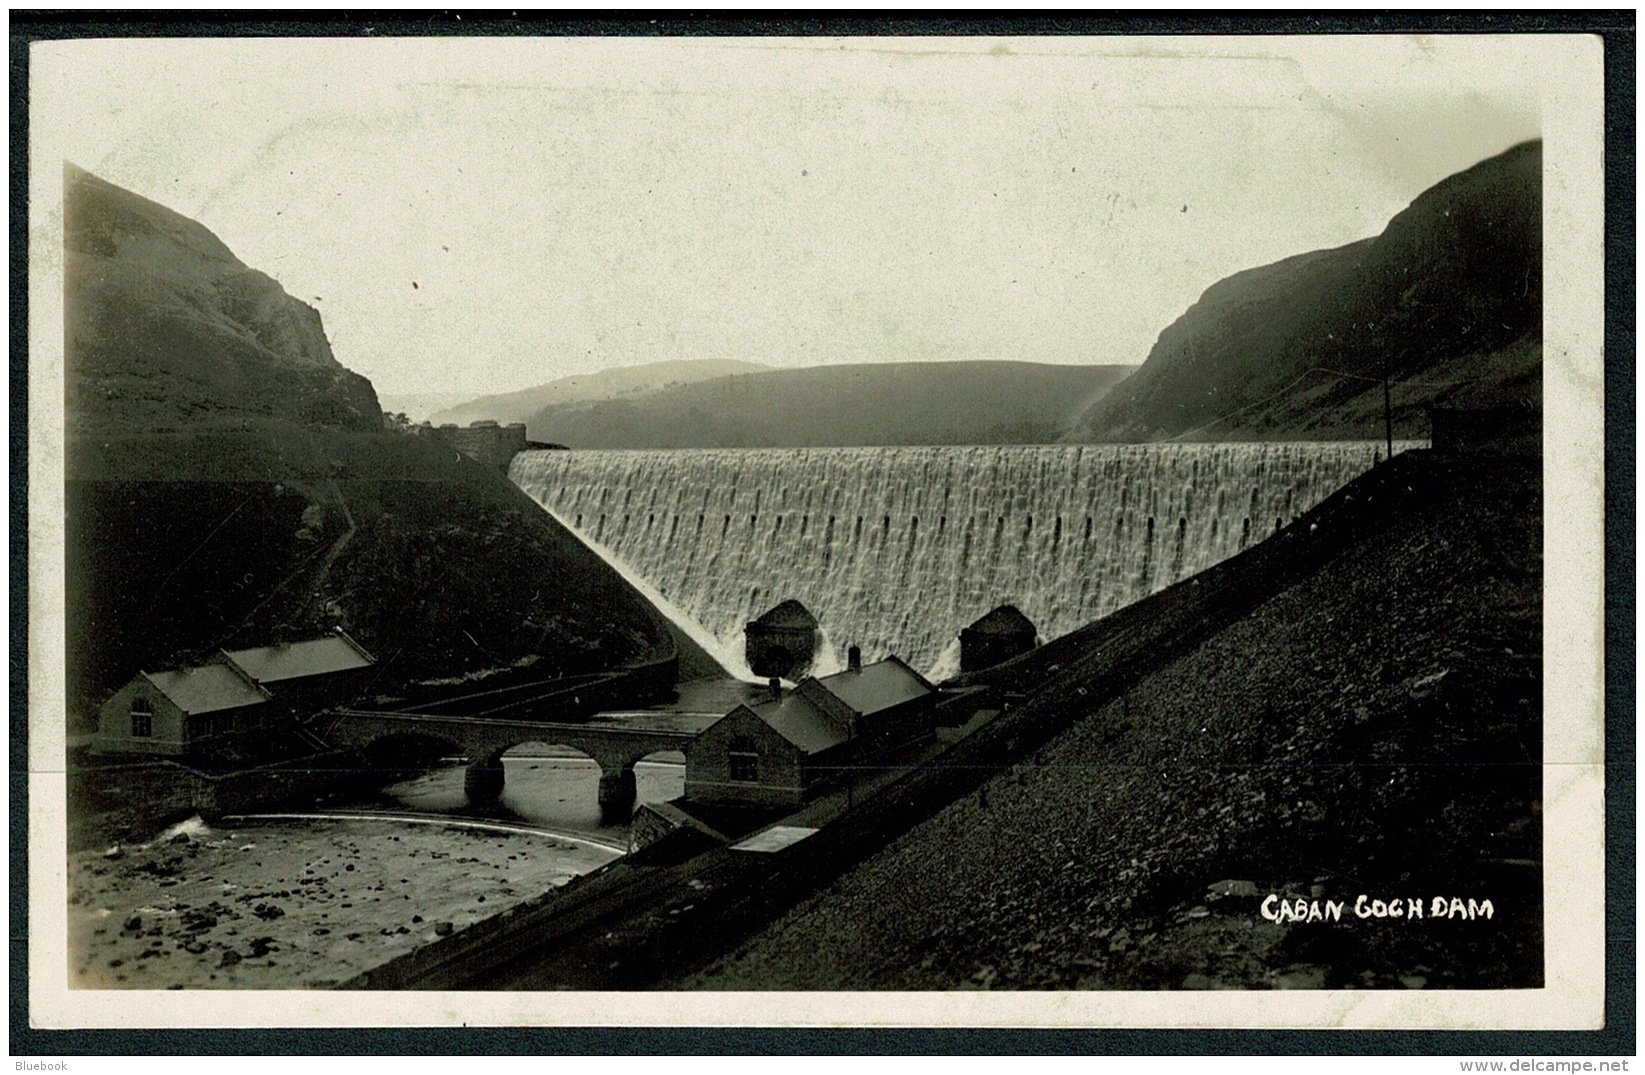 RB 1213 - 1926 Real Photo Postcard - Caban Coch Dam - Elan Valley Water Works Wales - Radnorshire